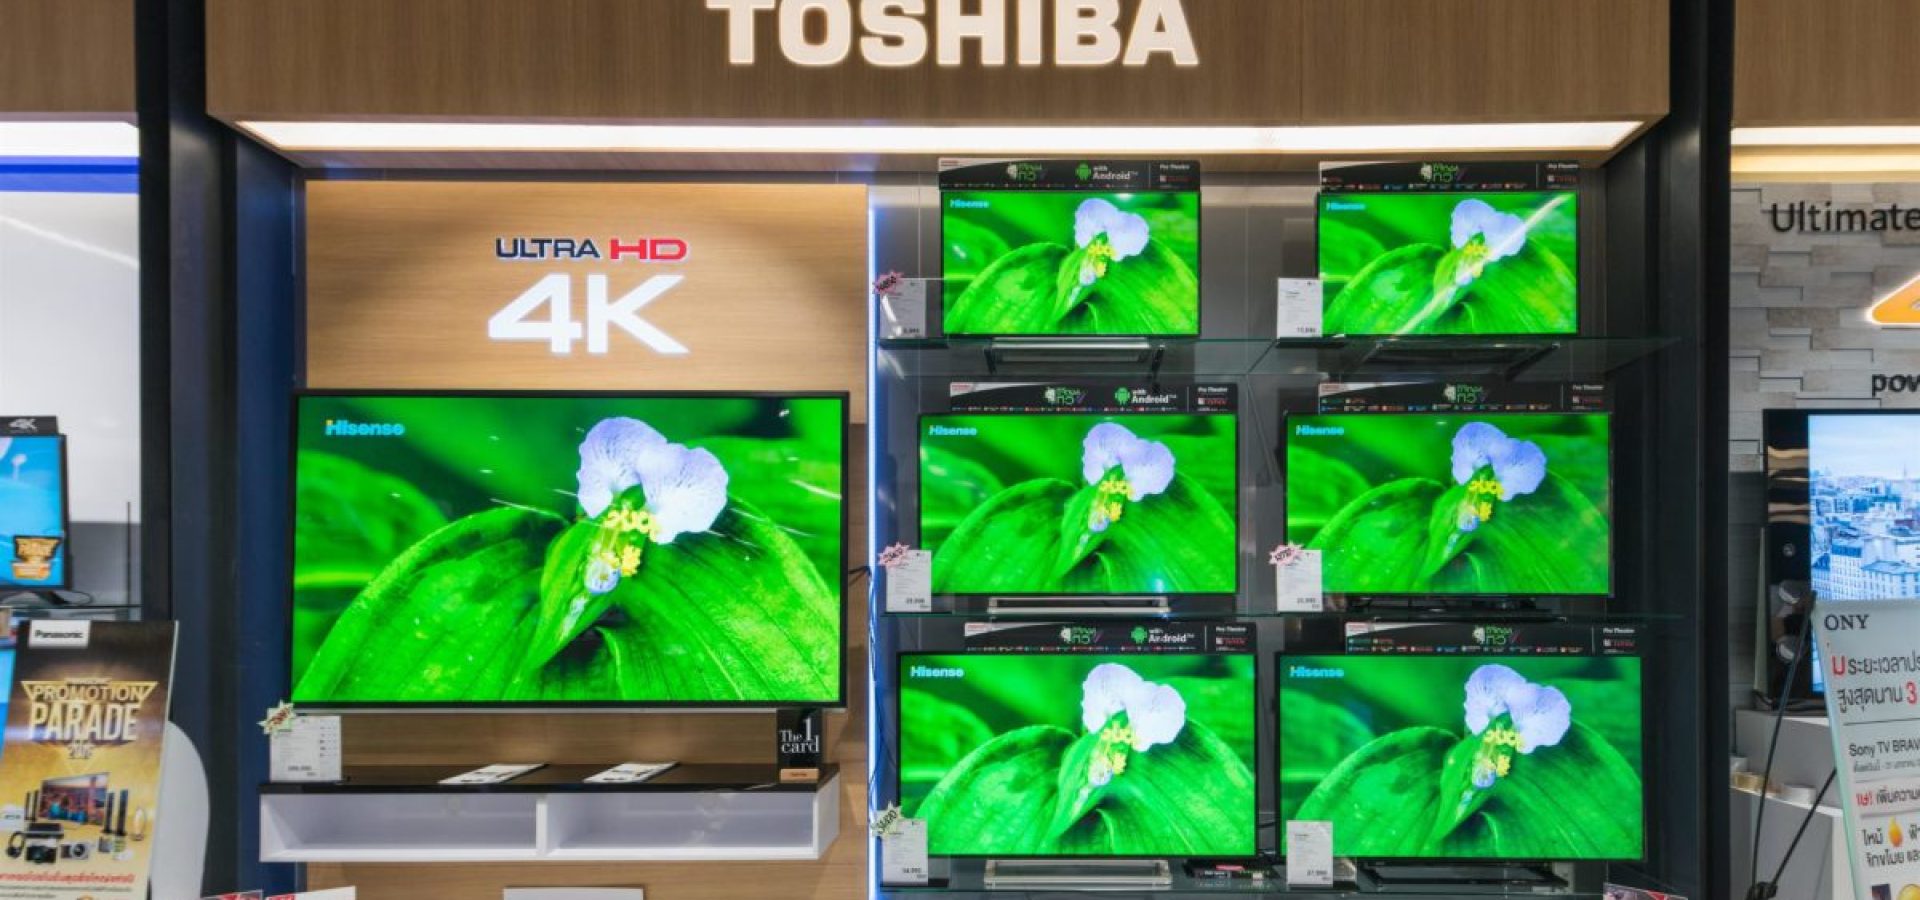 Toshiba faces unclear future after key shareholder vote